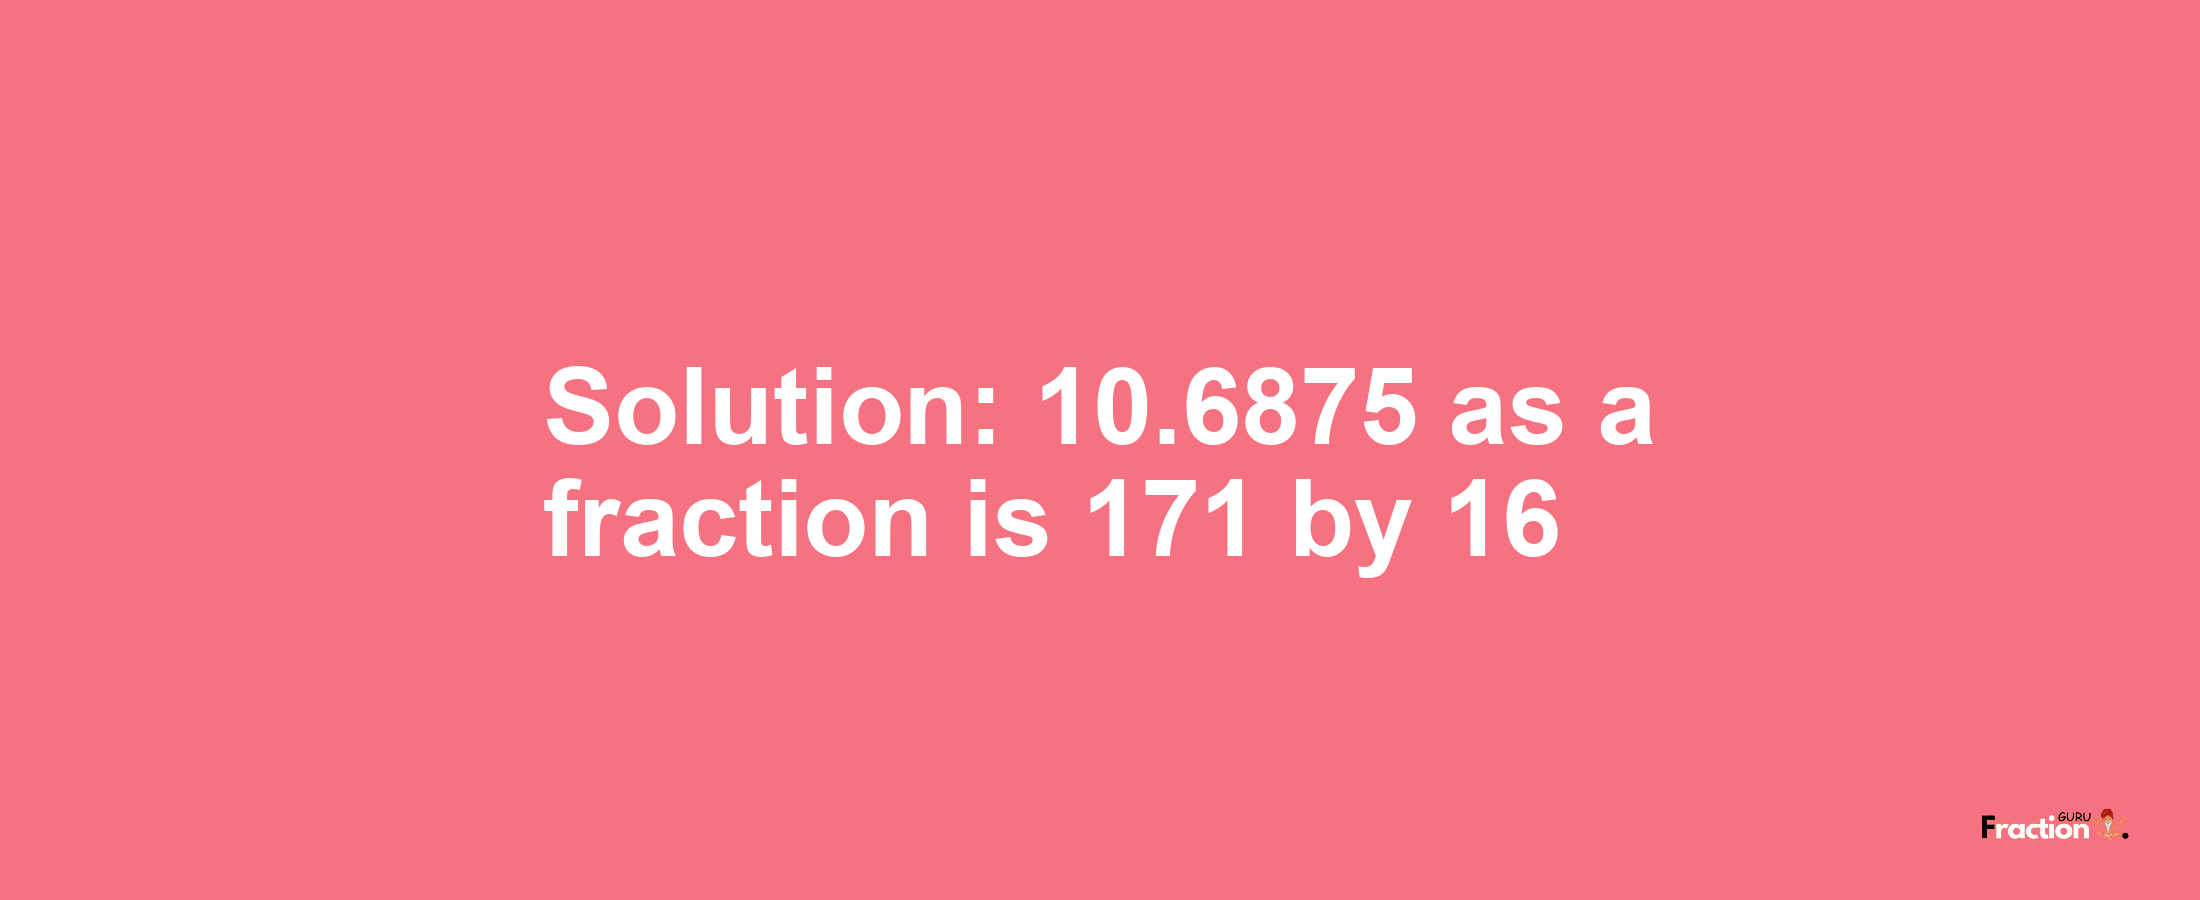 Solution:10.6875 as a fraction is 171/16